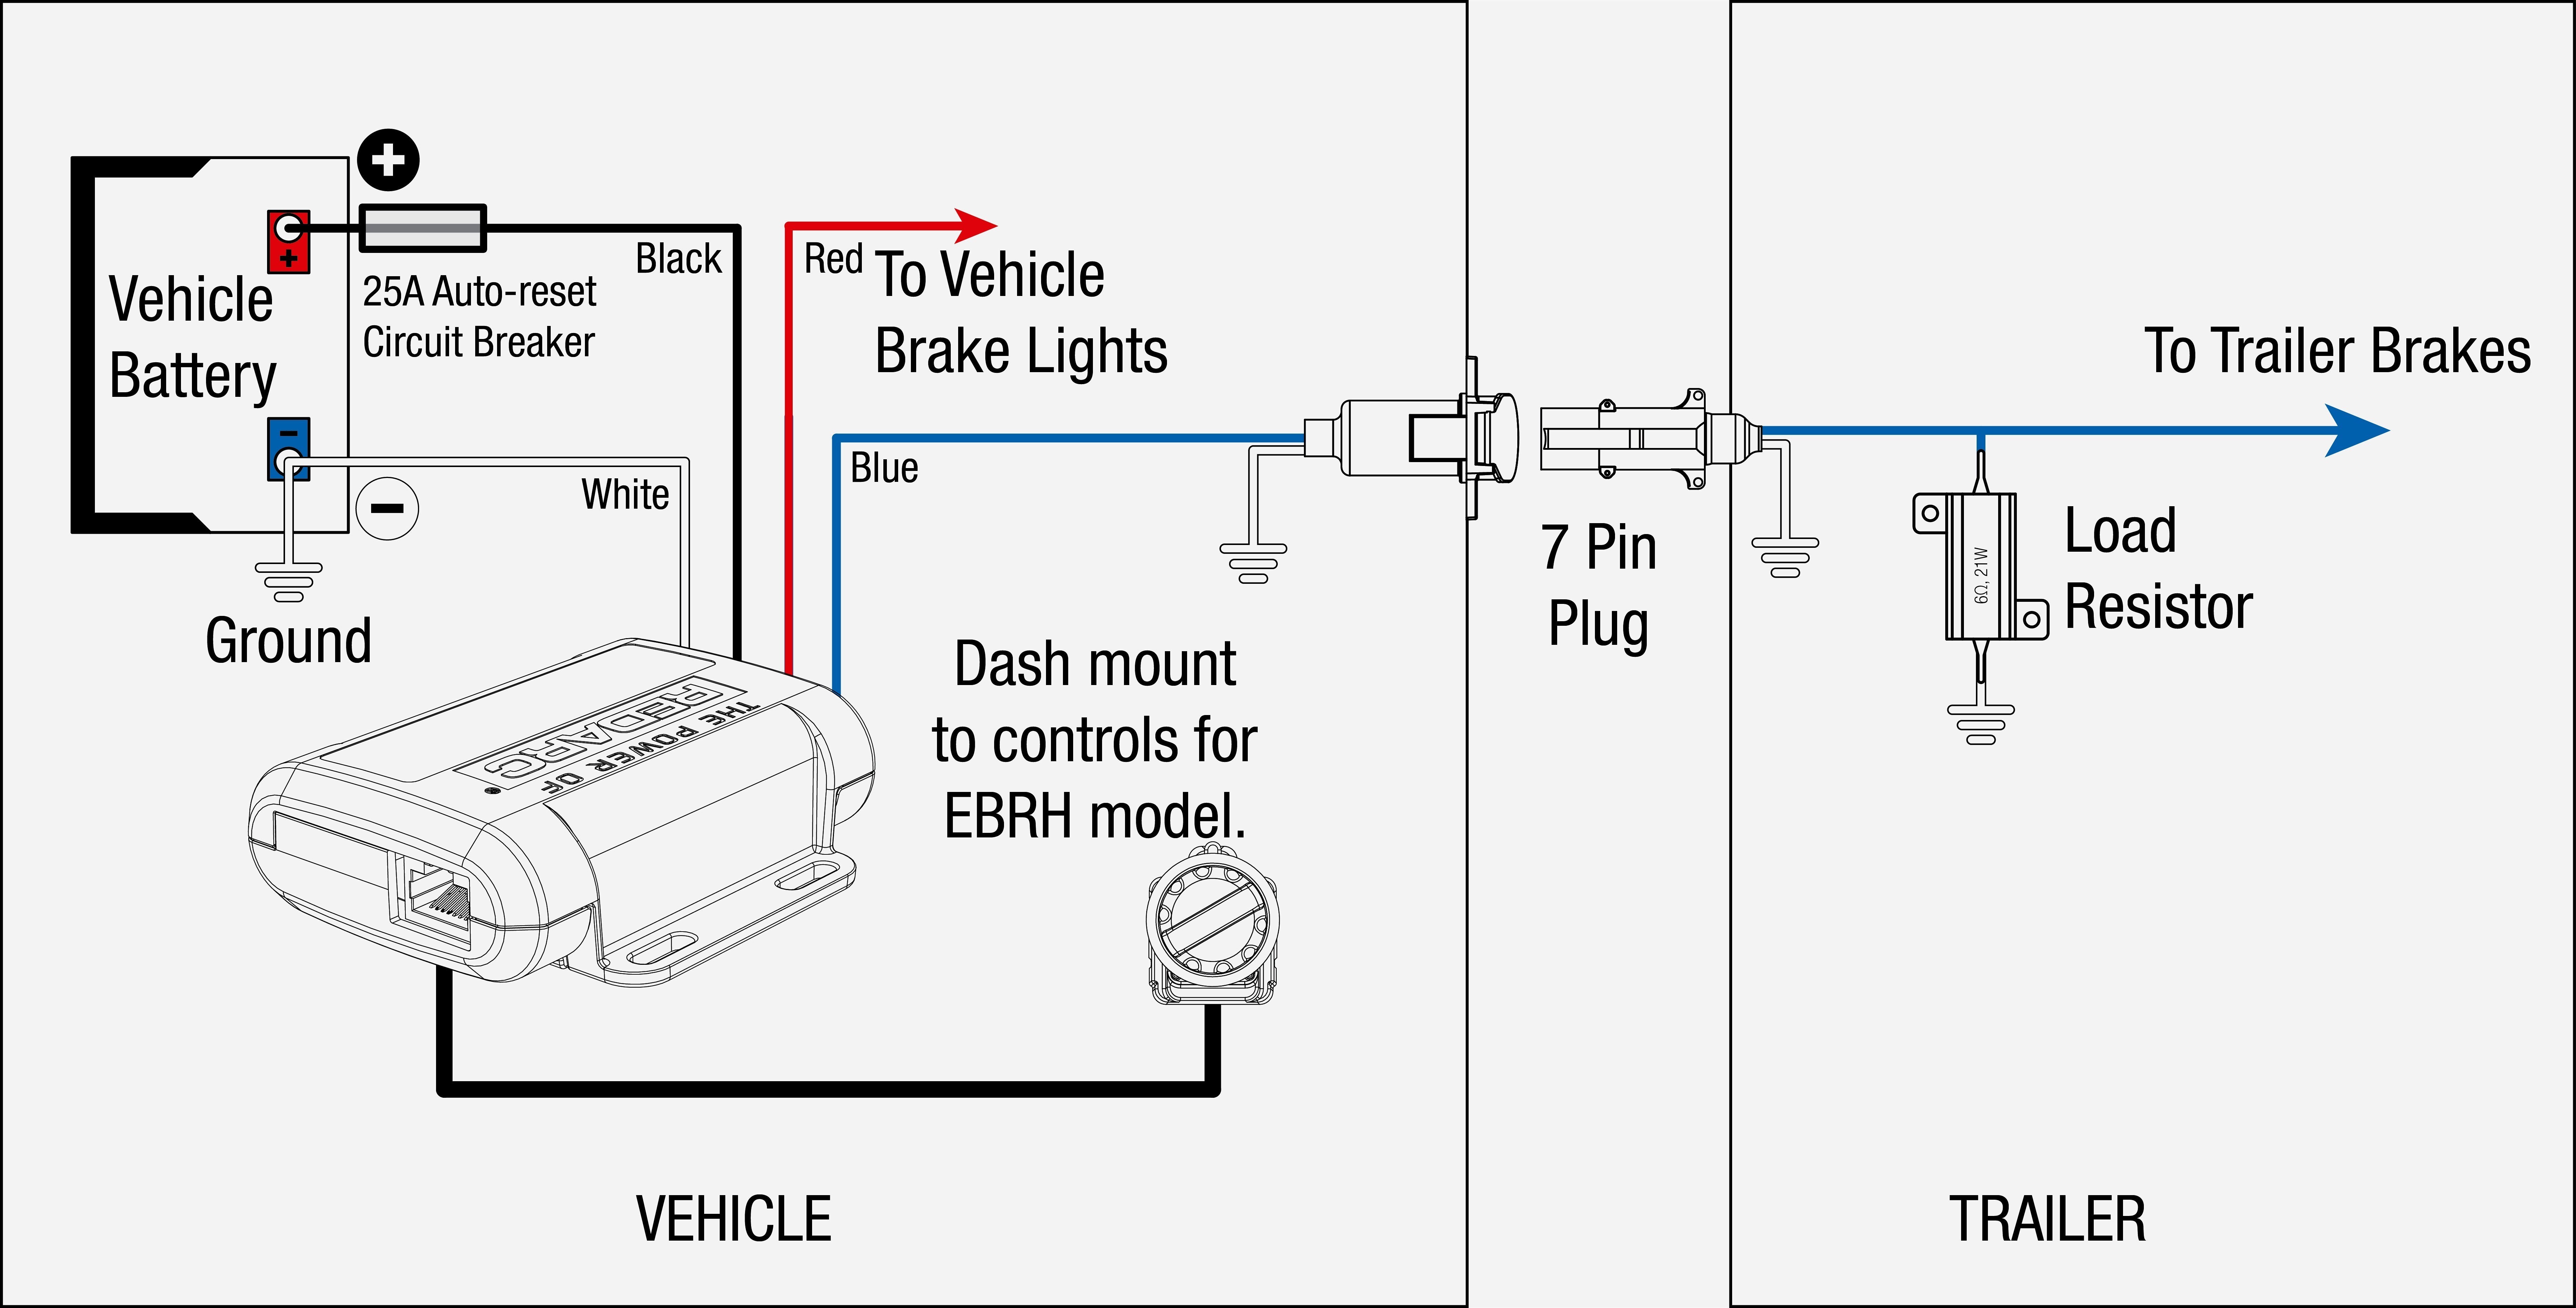 Wiring Diagram for Redarc Electric Brake Controller Fresh Wiring Diagram for Redarc Electric Brake Controller Archives